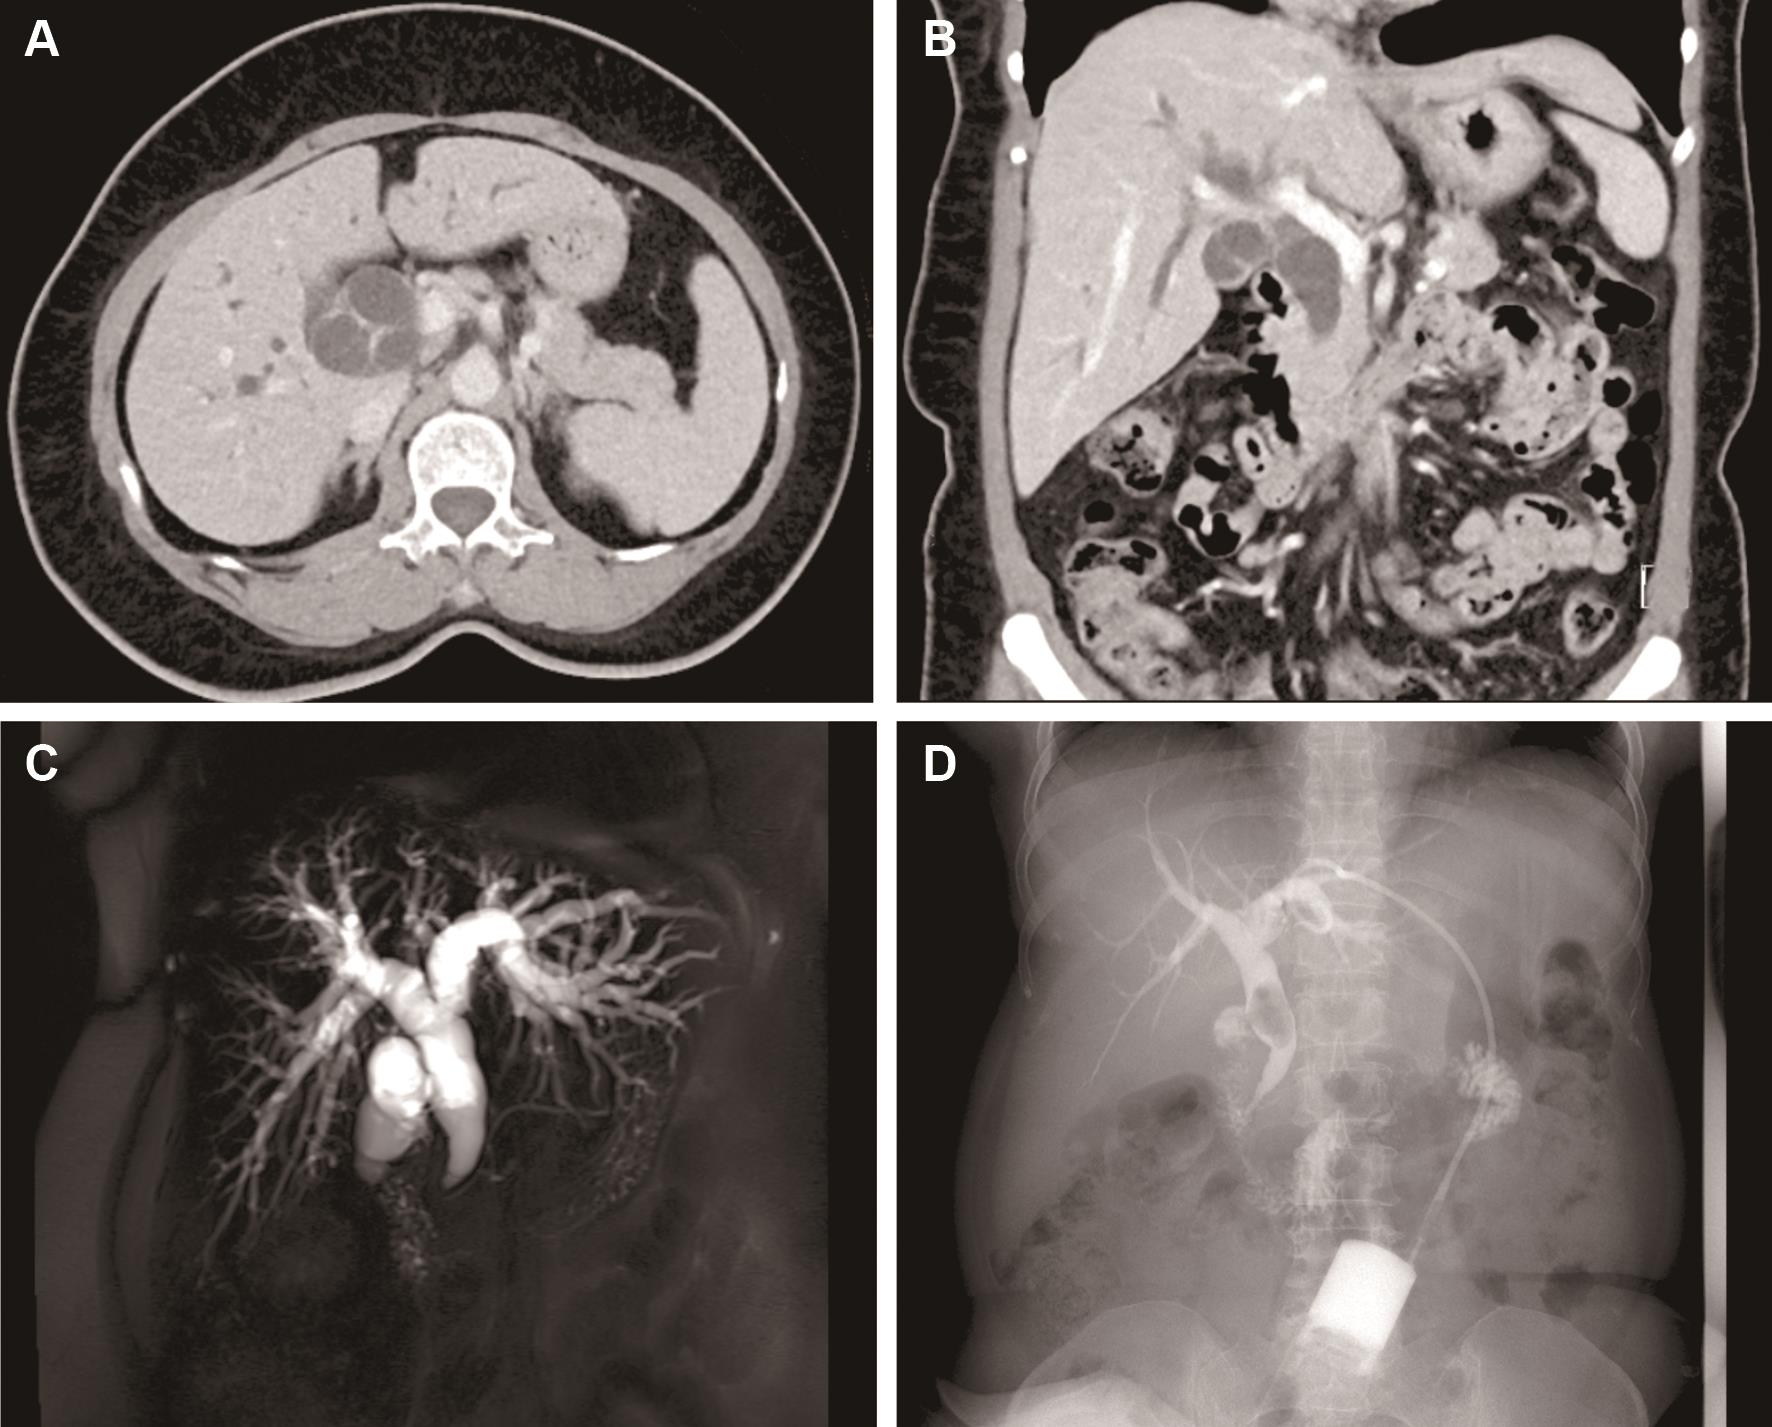 Preoperative imaging revealed biliary obstruction.